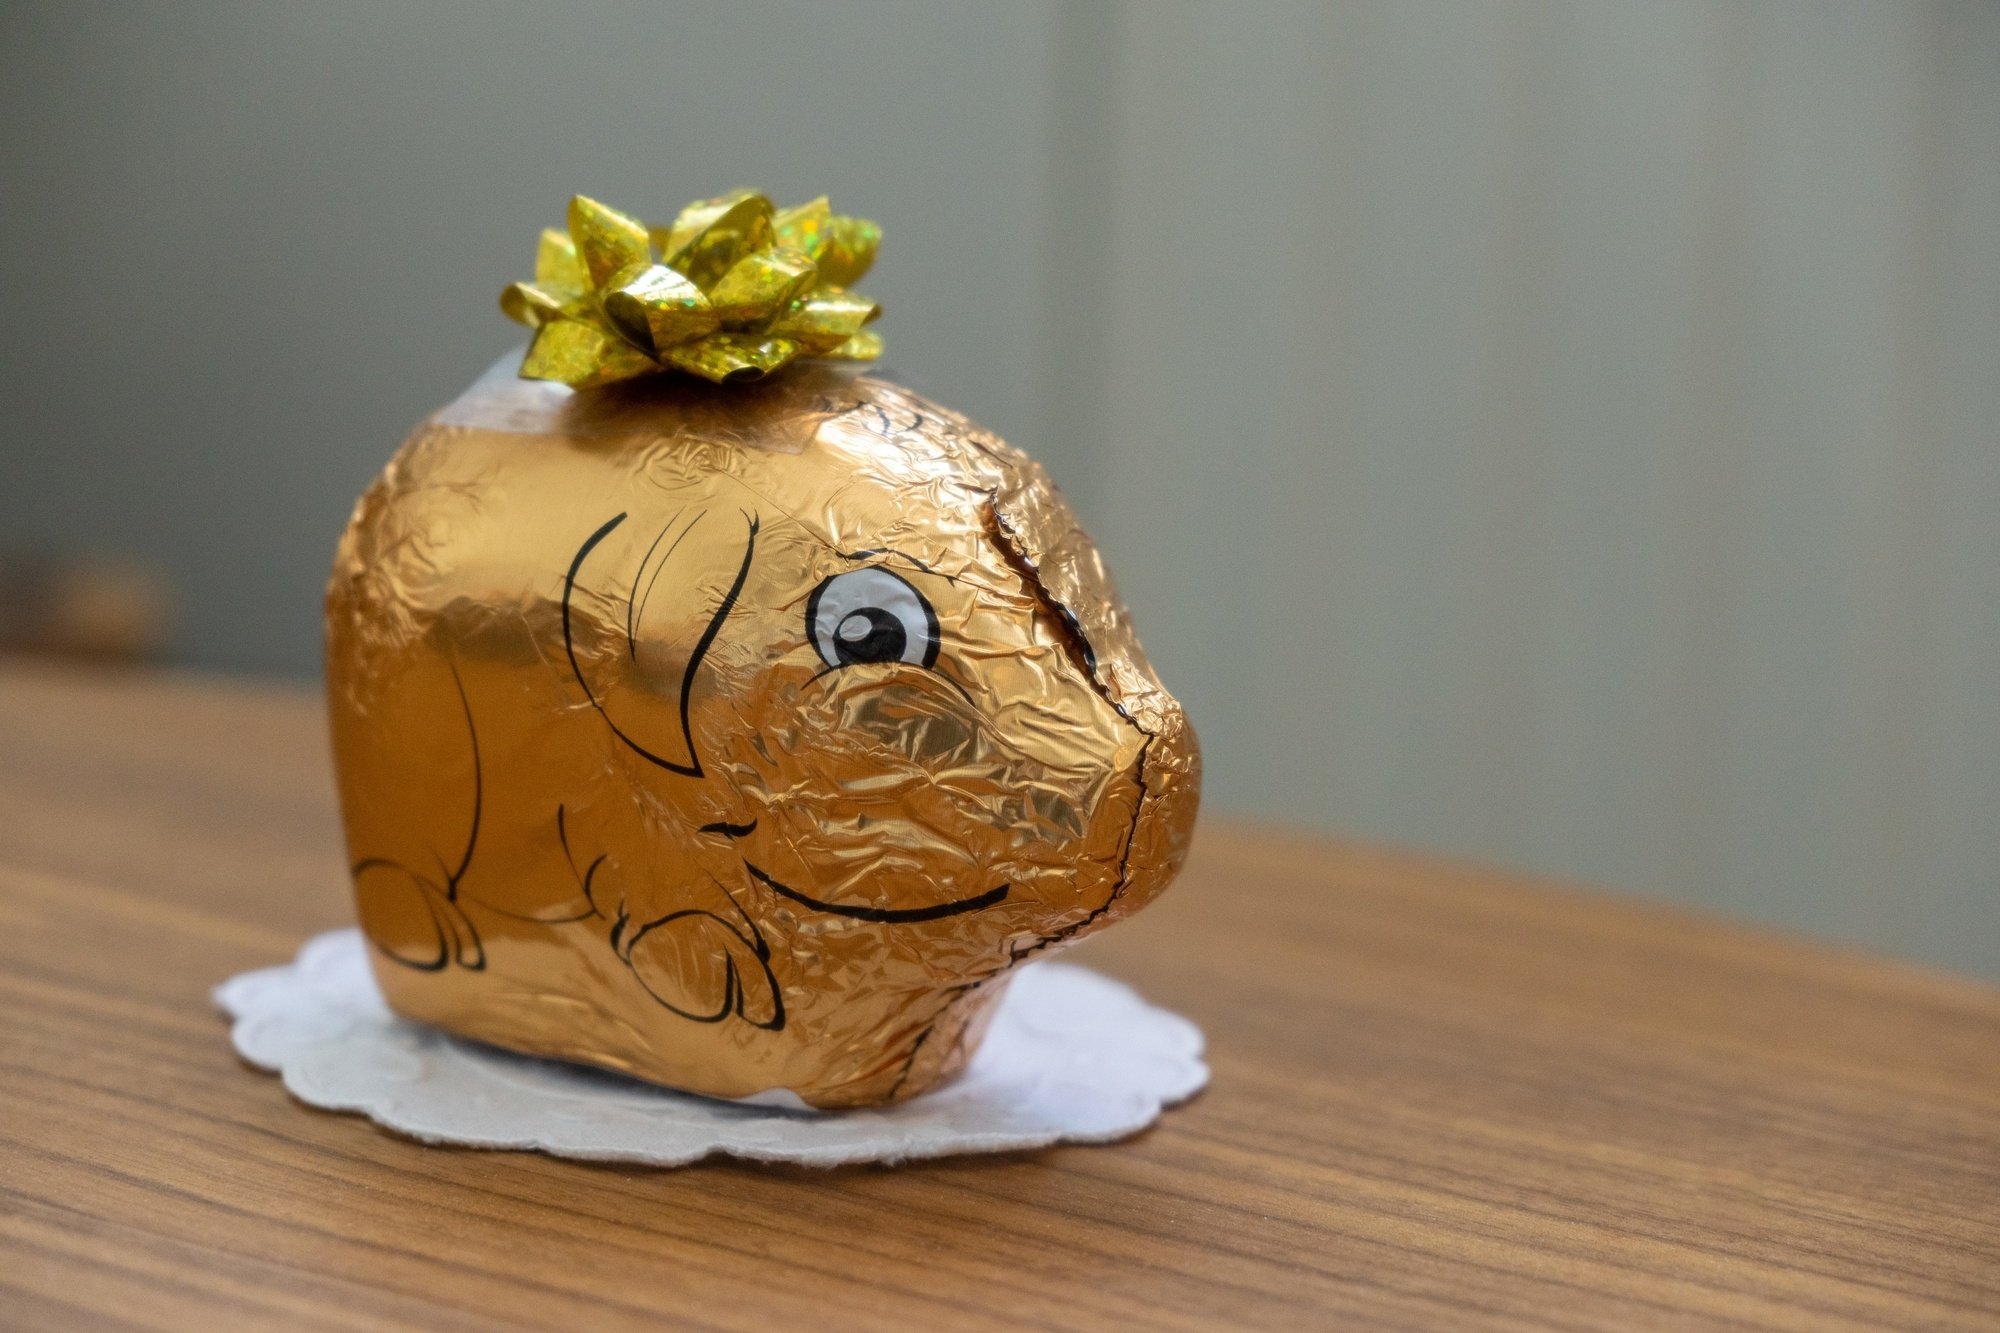 Look for golden pigs made of chocolate in the Czech Republic and Slovakia at Christmastime